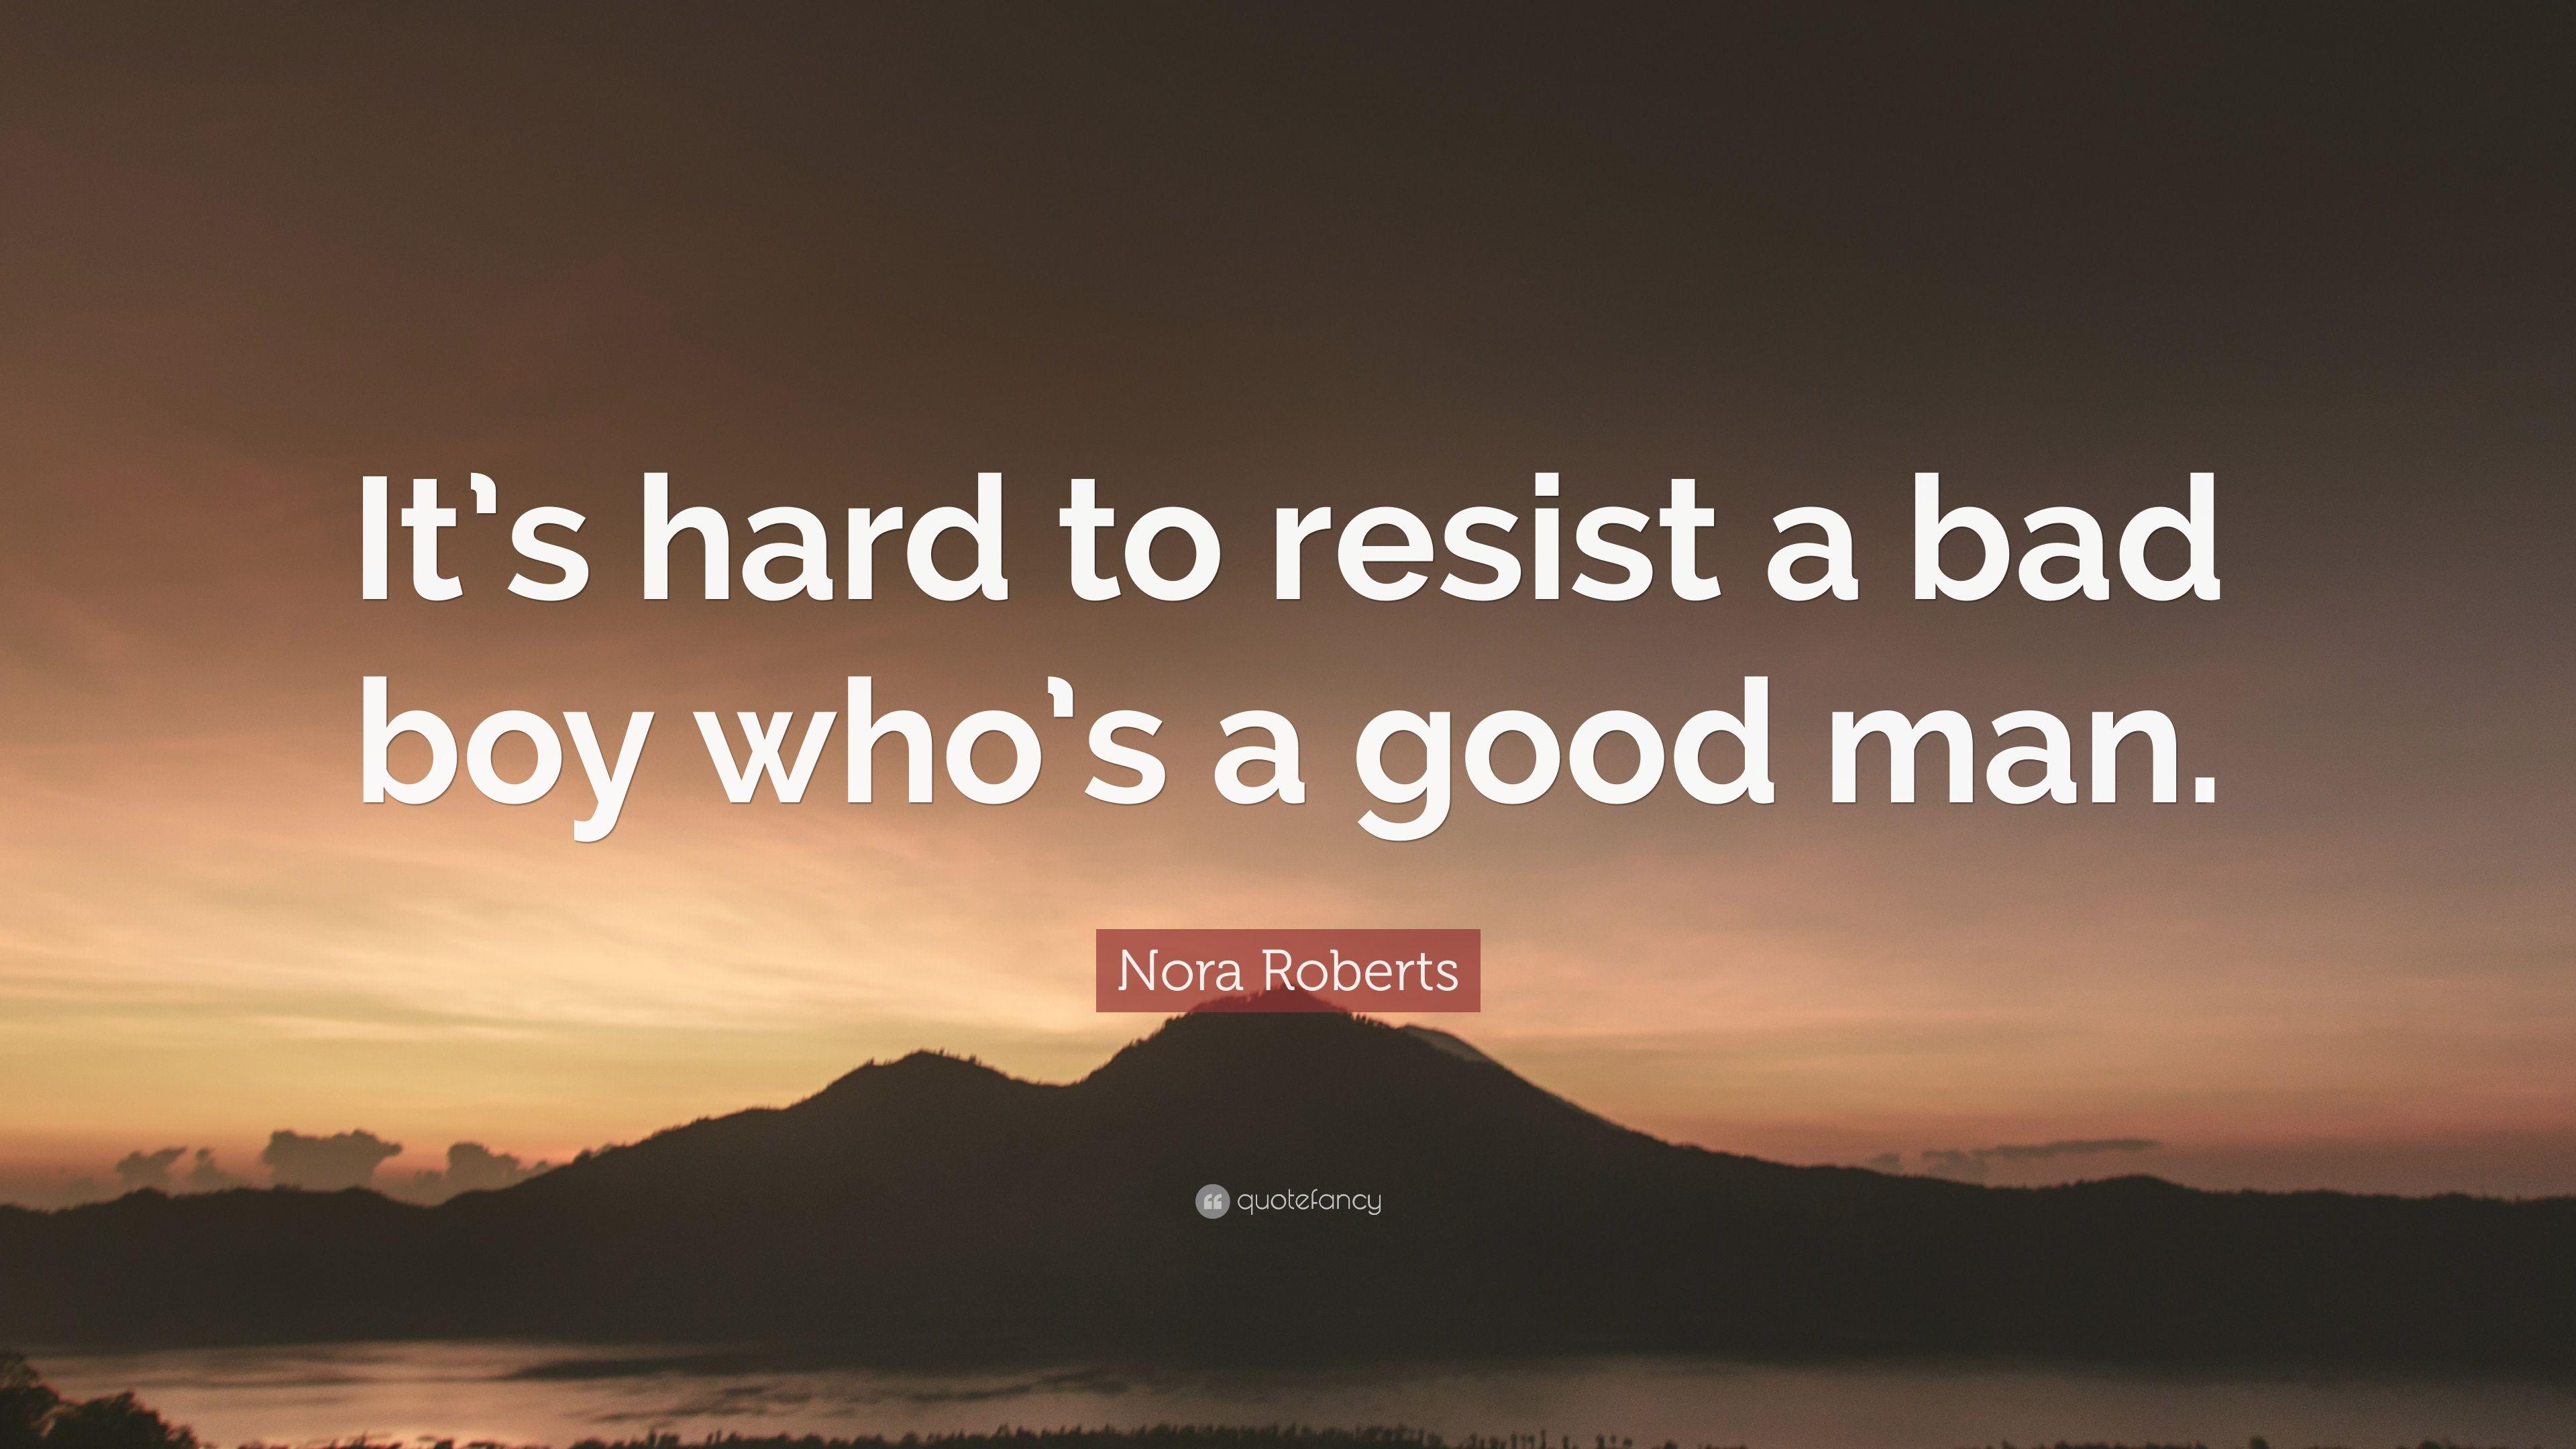 Nora Roberts Quote: “It's hard to resist a bad boy who's a good